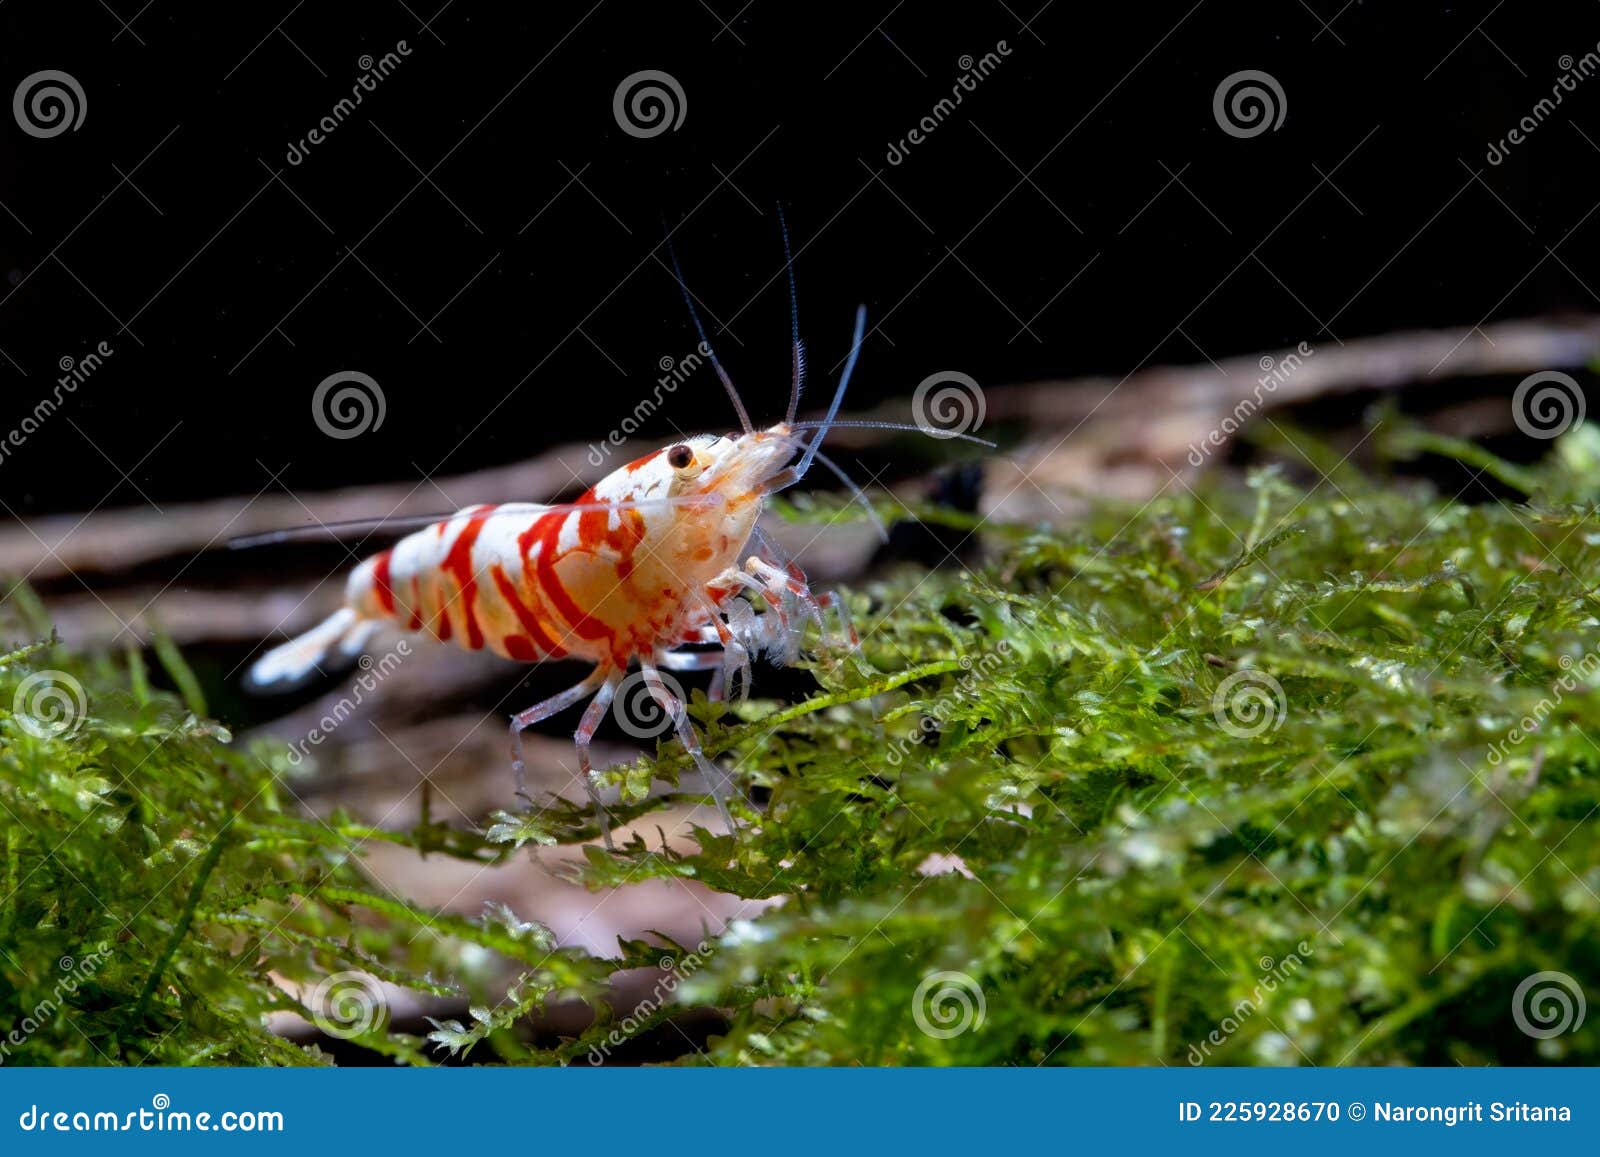 Red Fancy Tiger Dwarf Shrimp Stay And Look For Food In Aquatic Soil ...